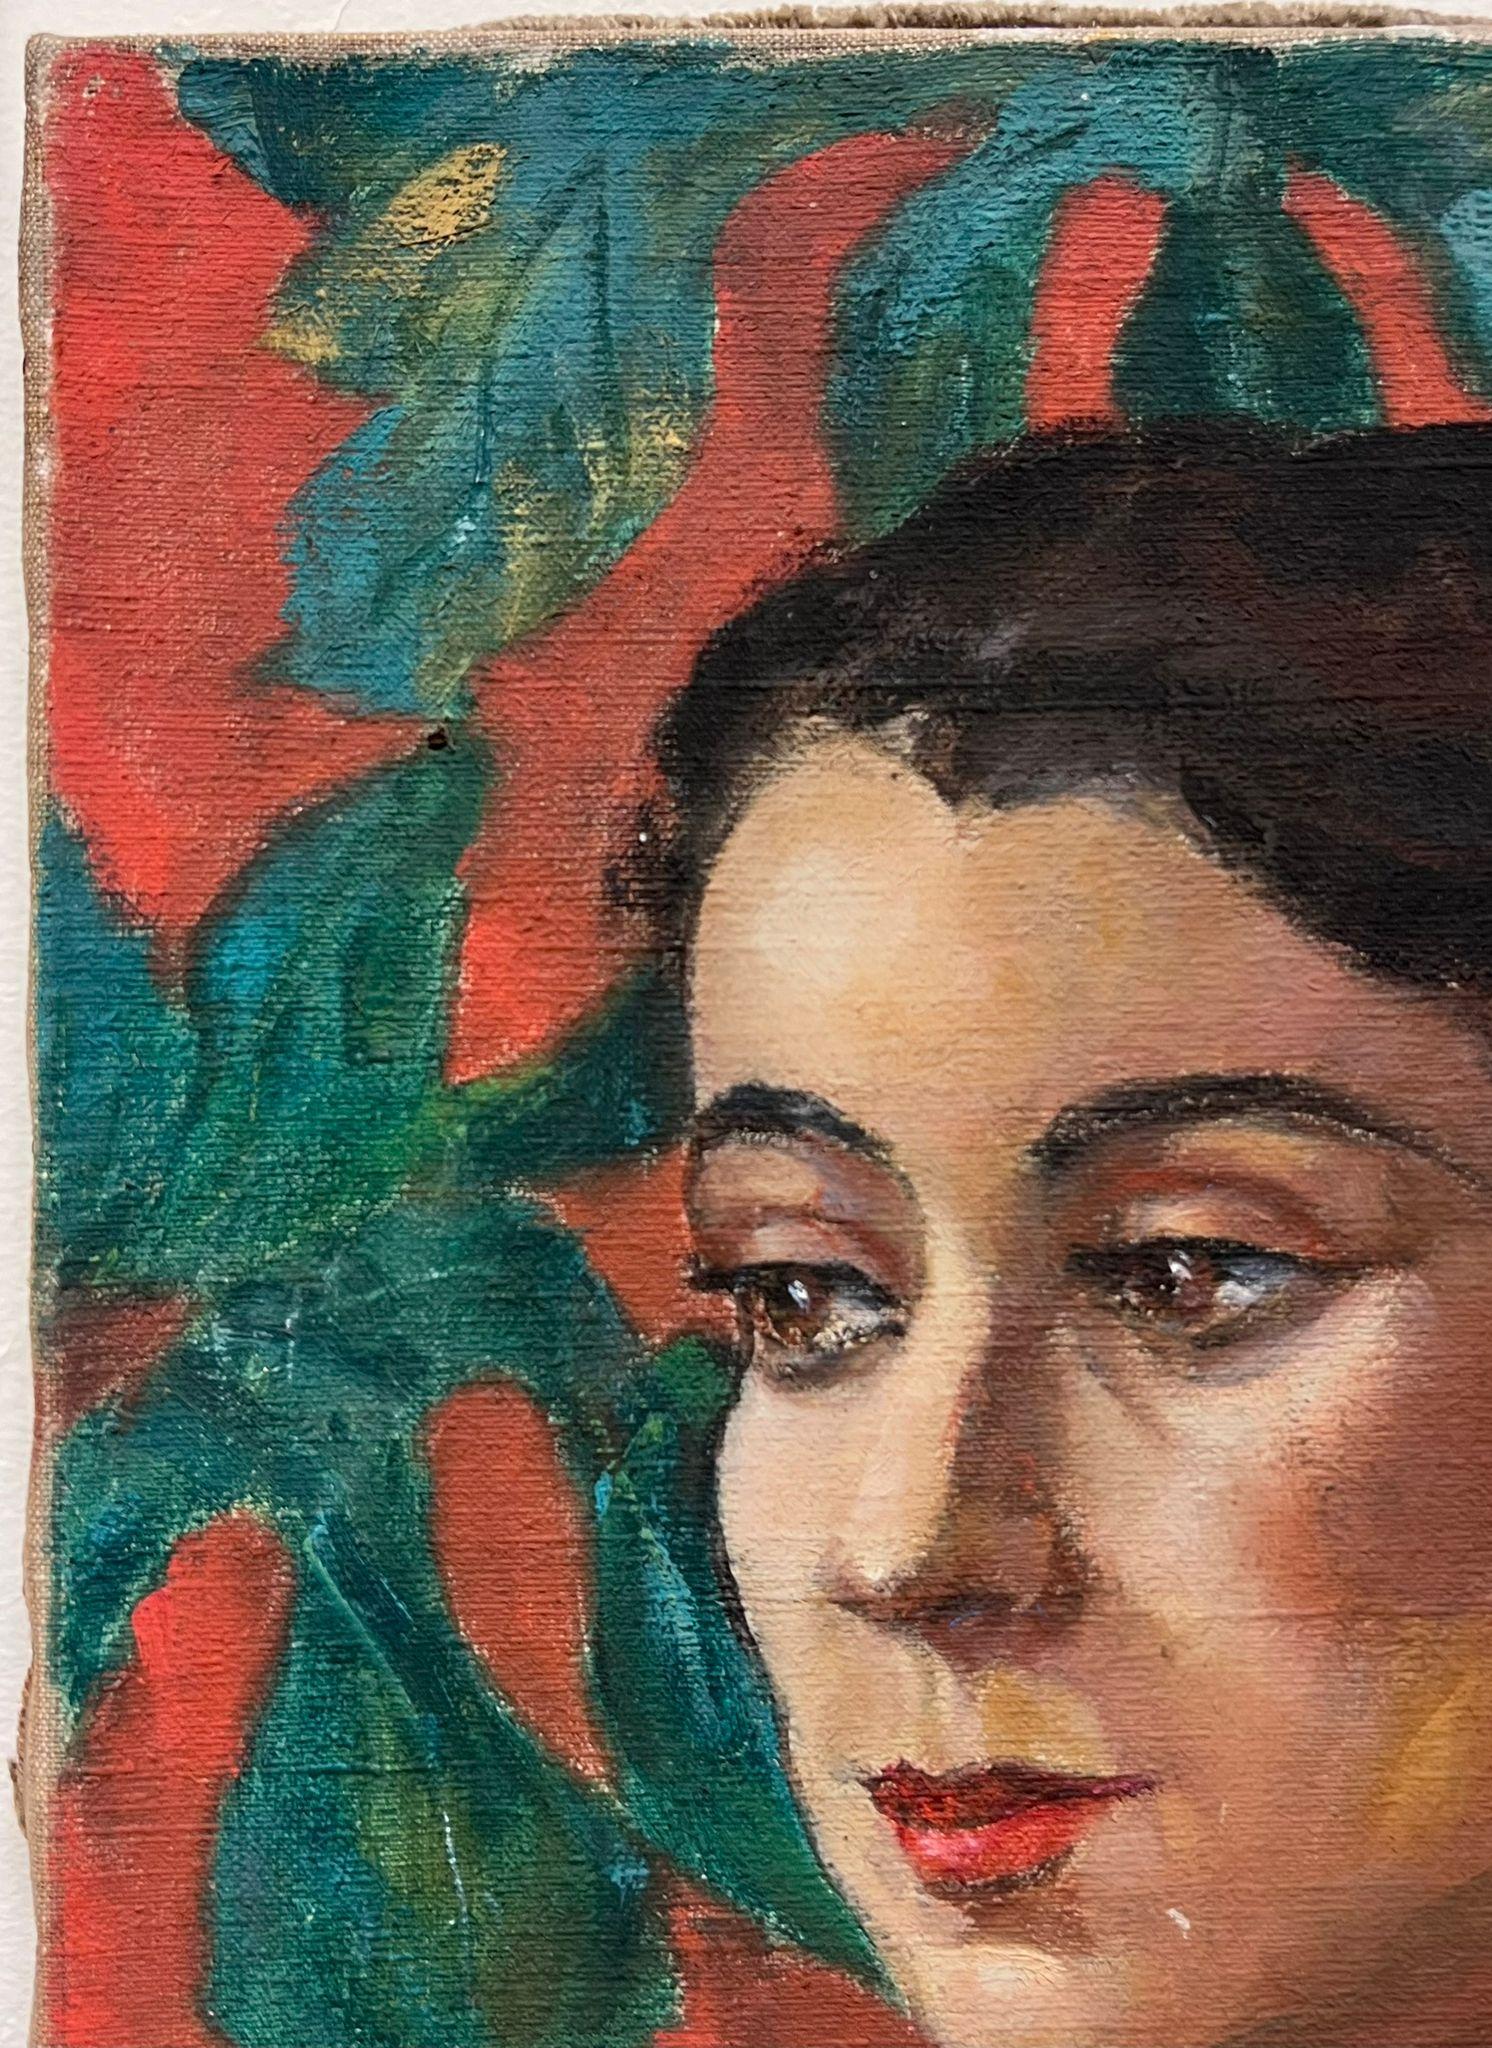 Portrait of a Woman
by Louise Alix (French, 1888-1980) *see notes below
provenance stamp to the back  
oil painting on canvas, unframed
measures: 18 high by 15 inches wide
condition: overall very good and sound, a few scuffs and marks to the surface